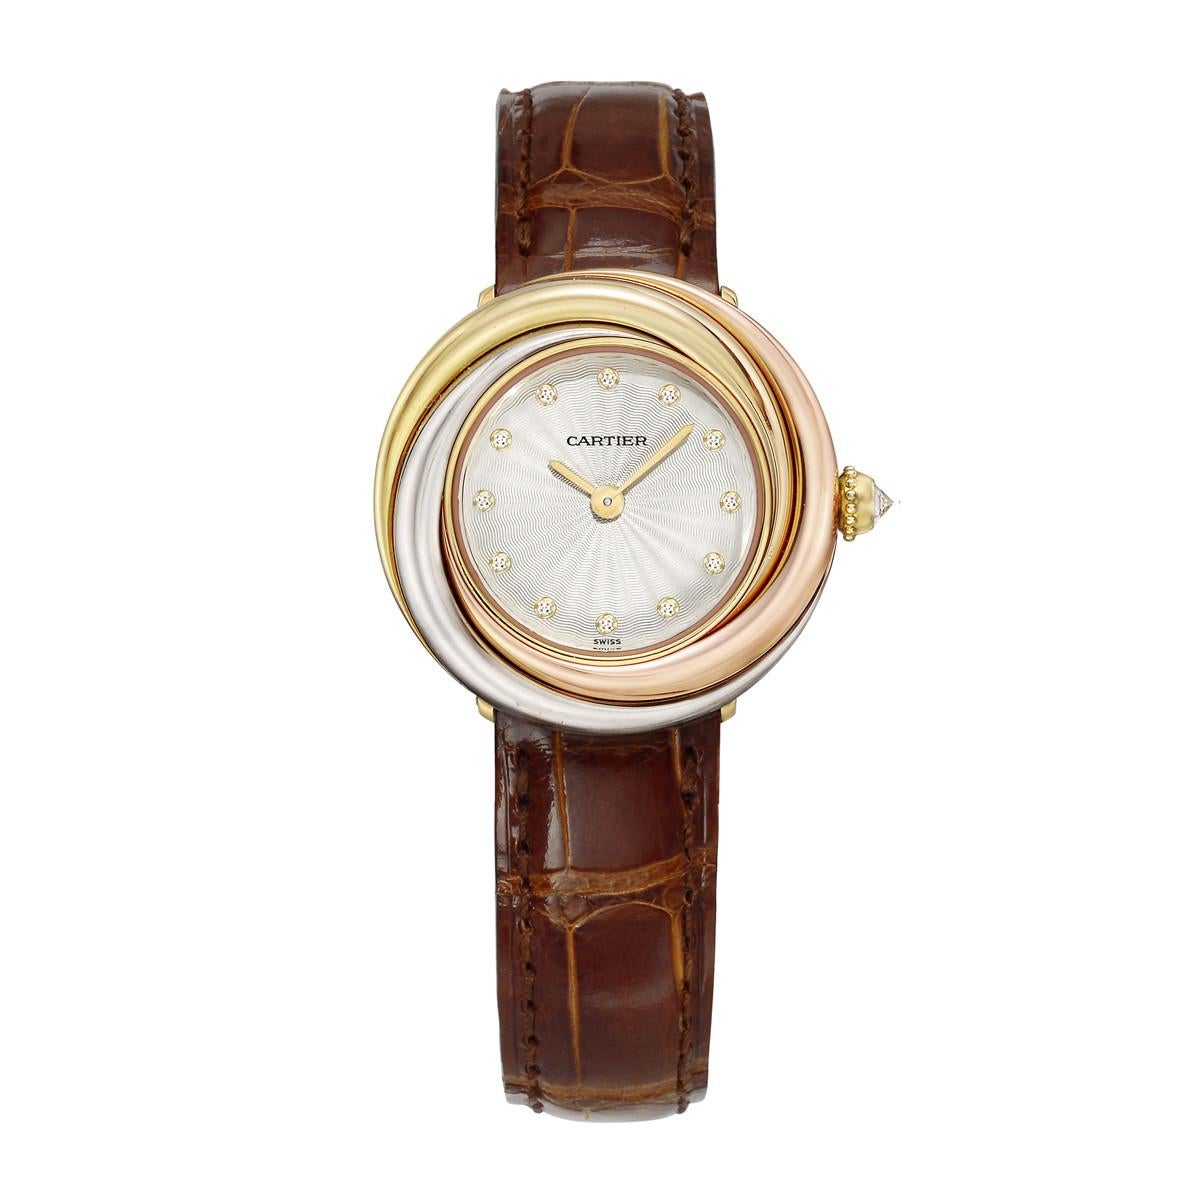 Pre-owned Trinity de Cartier wristwatch (ref. W200246), featuring a Swiss-made quartz movement; silvered guilloché dial with diamond-set hour markers; and 26.9mm, 18k yellow, rose and white gold case on a brown alligator strap secured by the Cartier